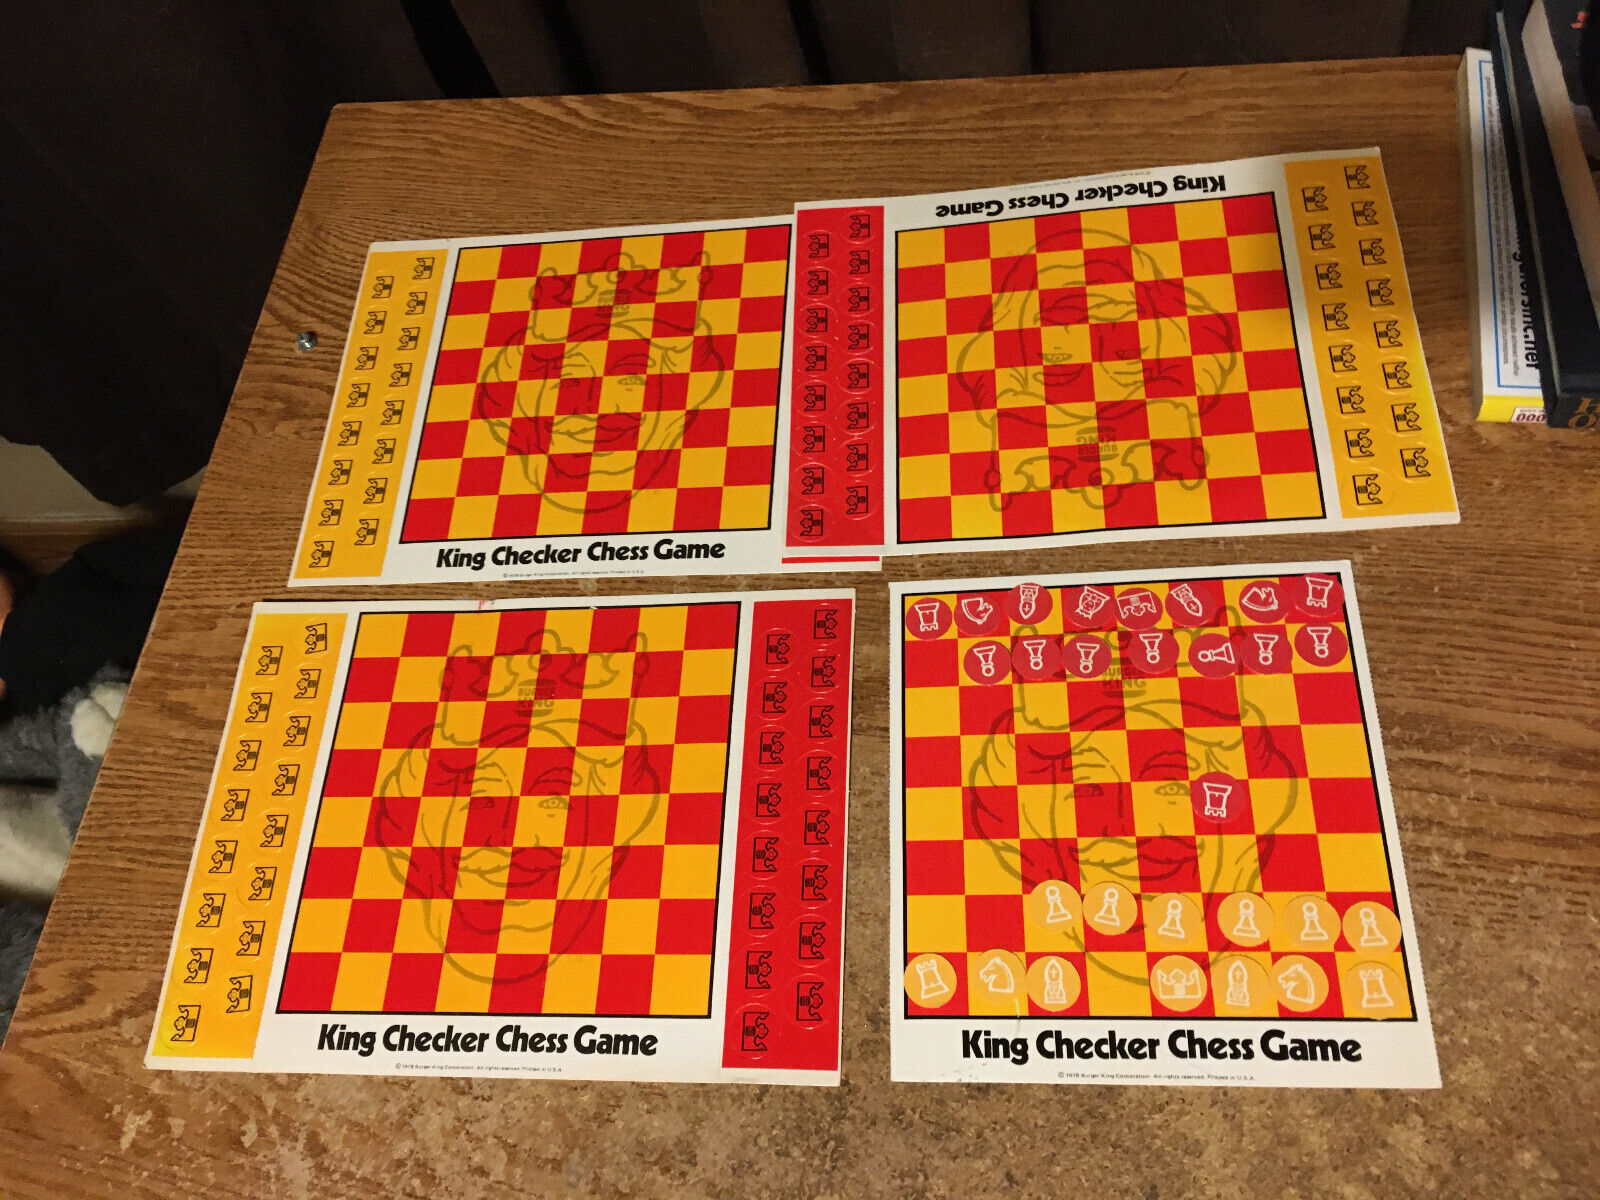 1978 BURGER KING CHECKERS CHESS GAME 4 BOARDS / WRONGWAY052